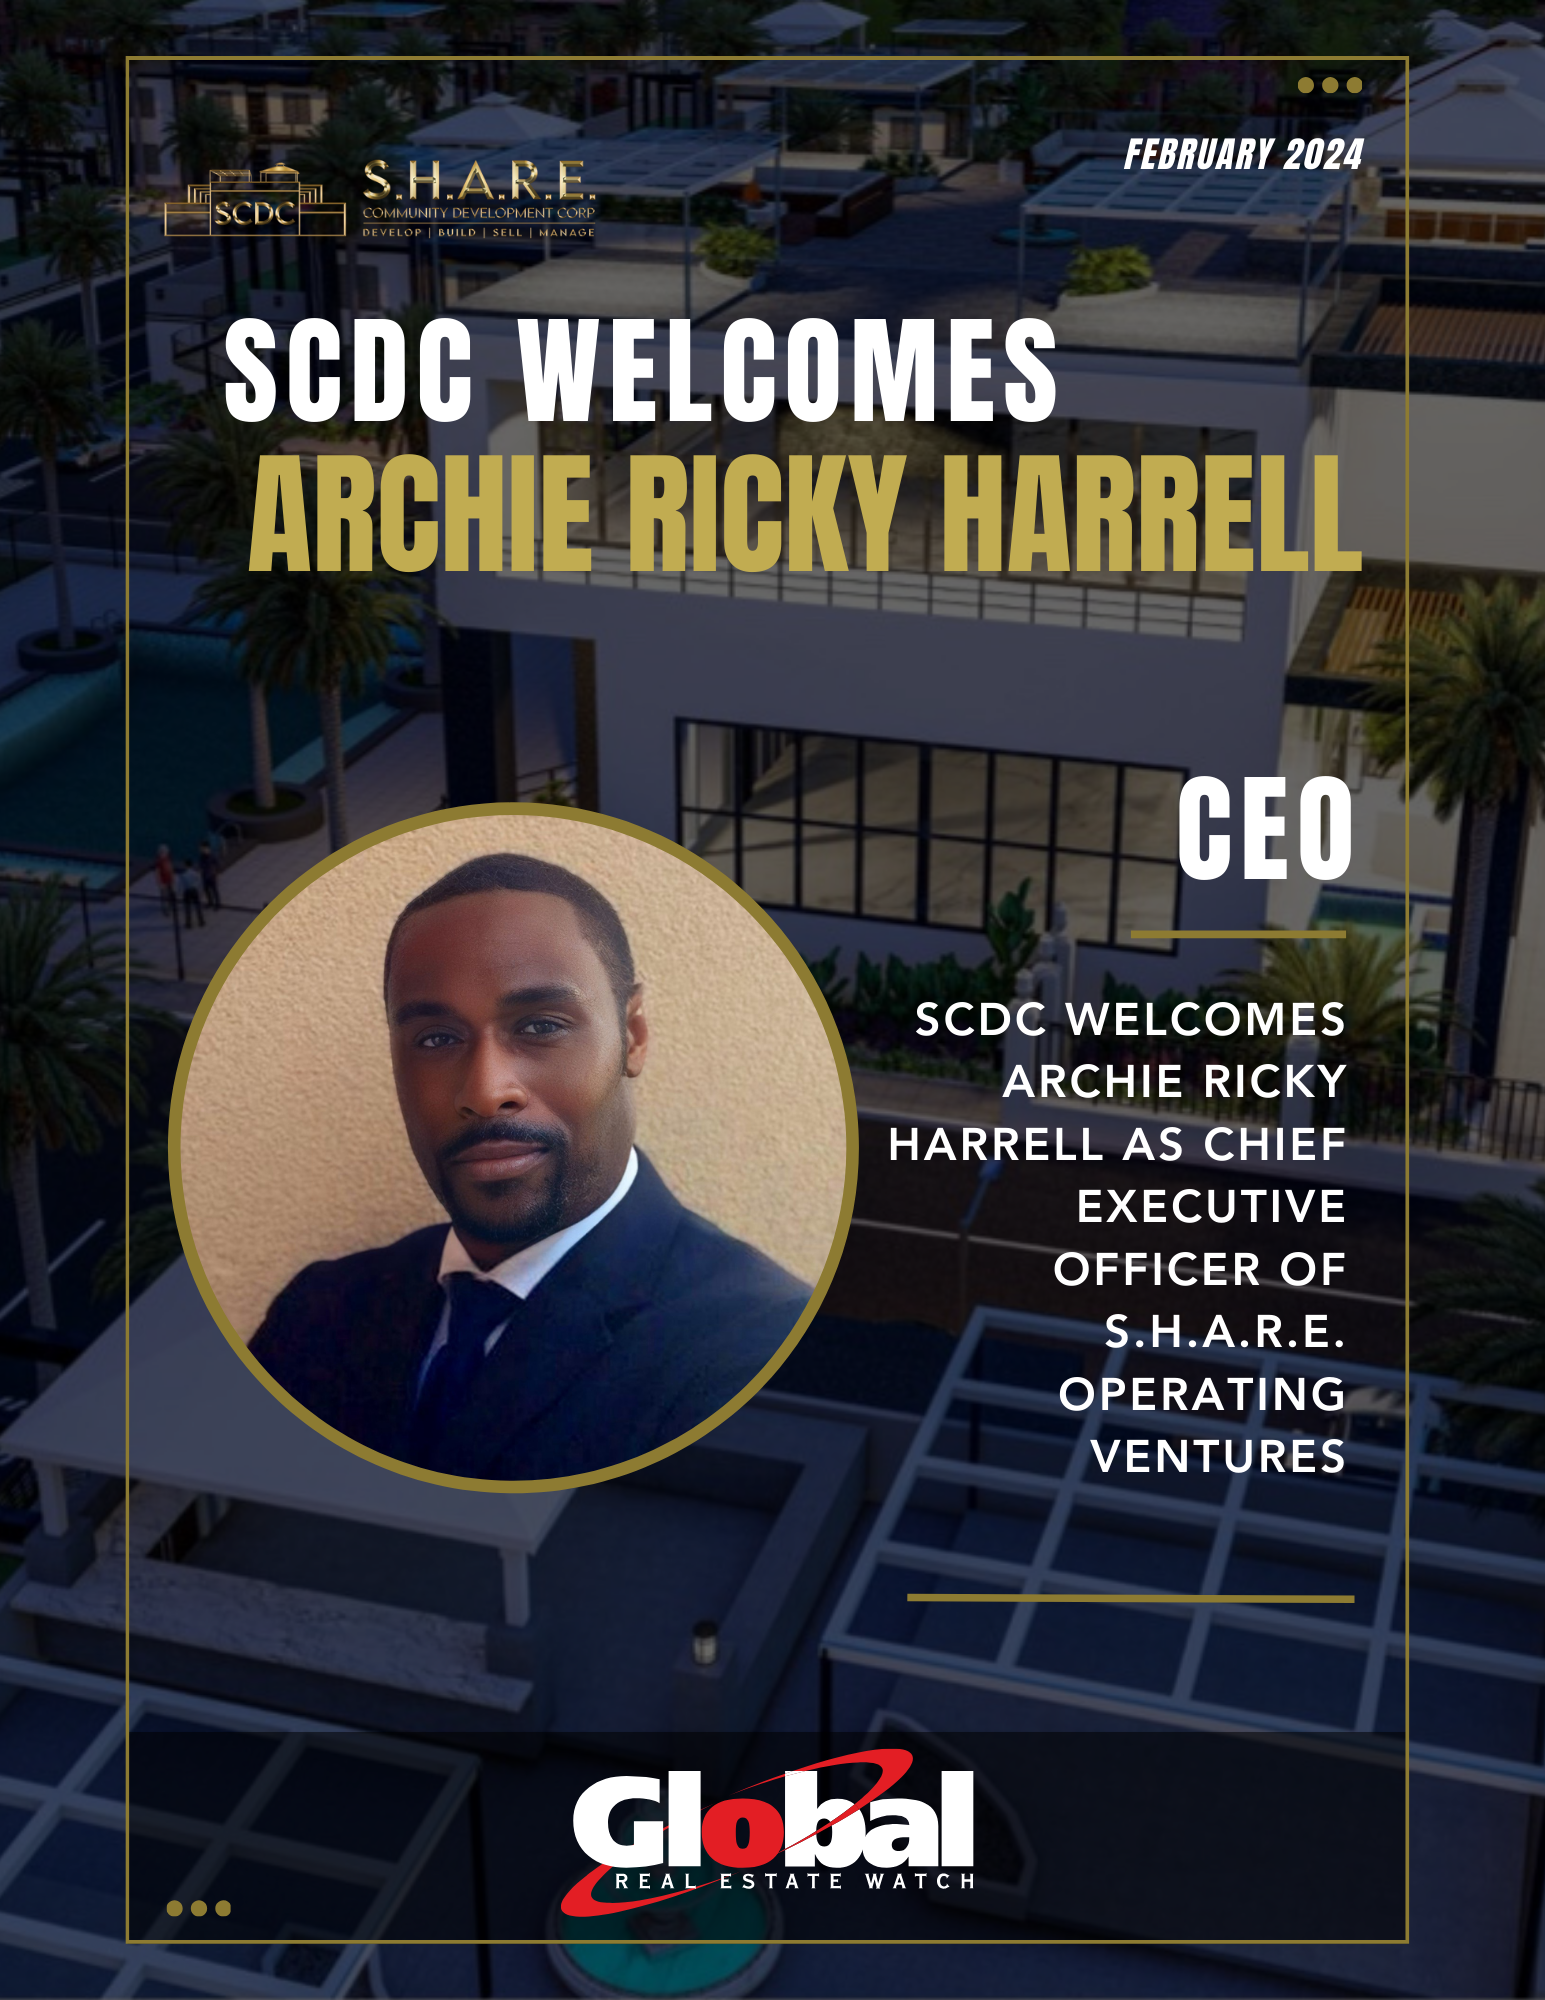 Archie Ricky Harrell Appointed CEO of S.H.A.R.E. Operating Ventures: A Visionary Leader in Real Estate Development